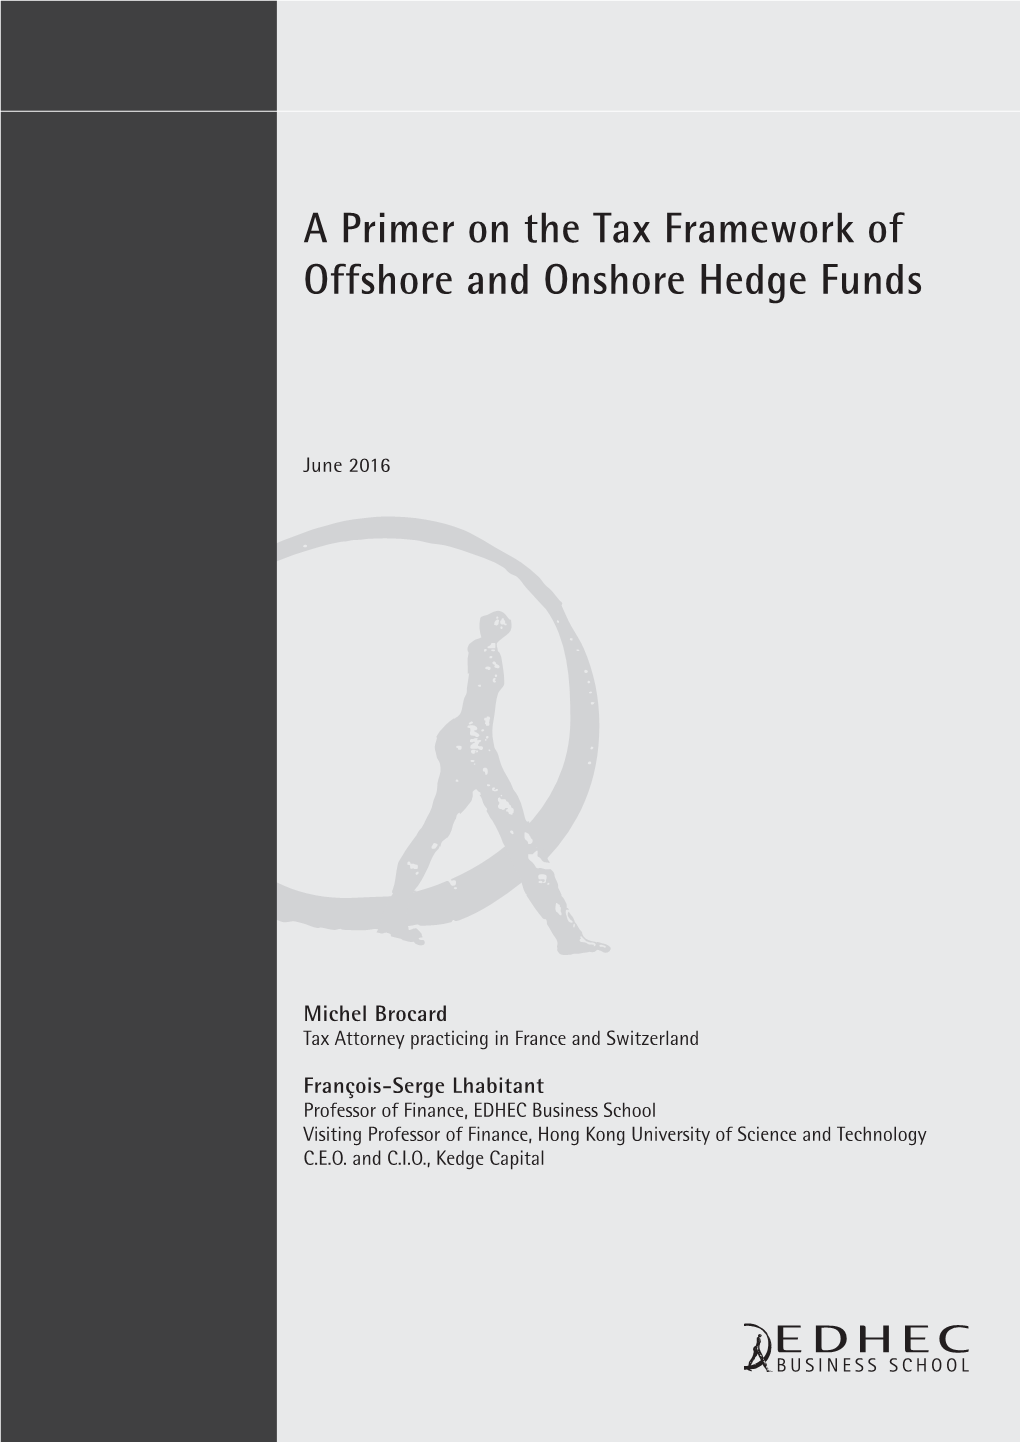 A Primer on the Tax Framework of Offshore and Onshore Hedge Funds